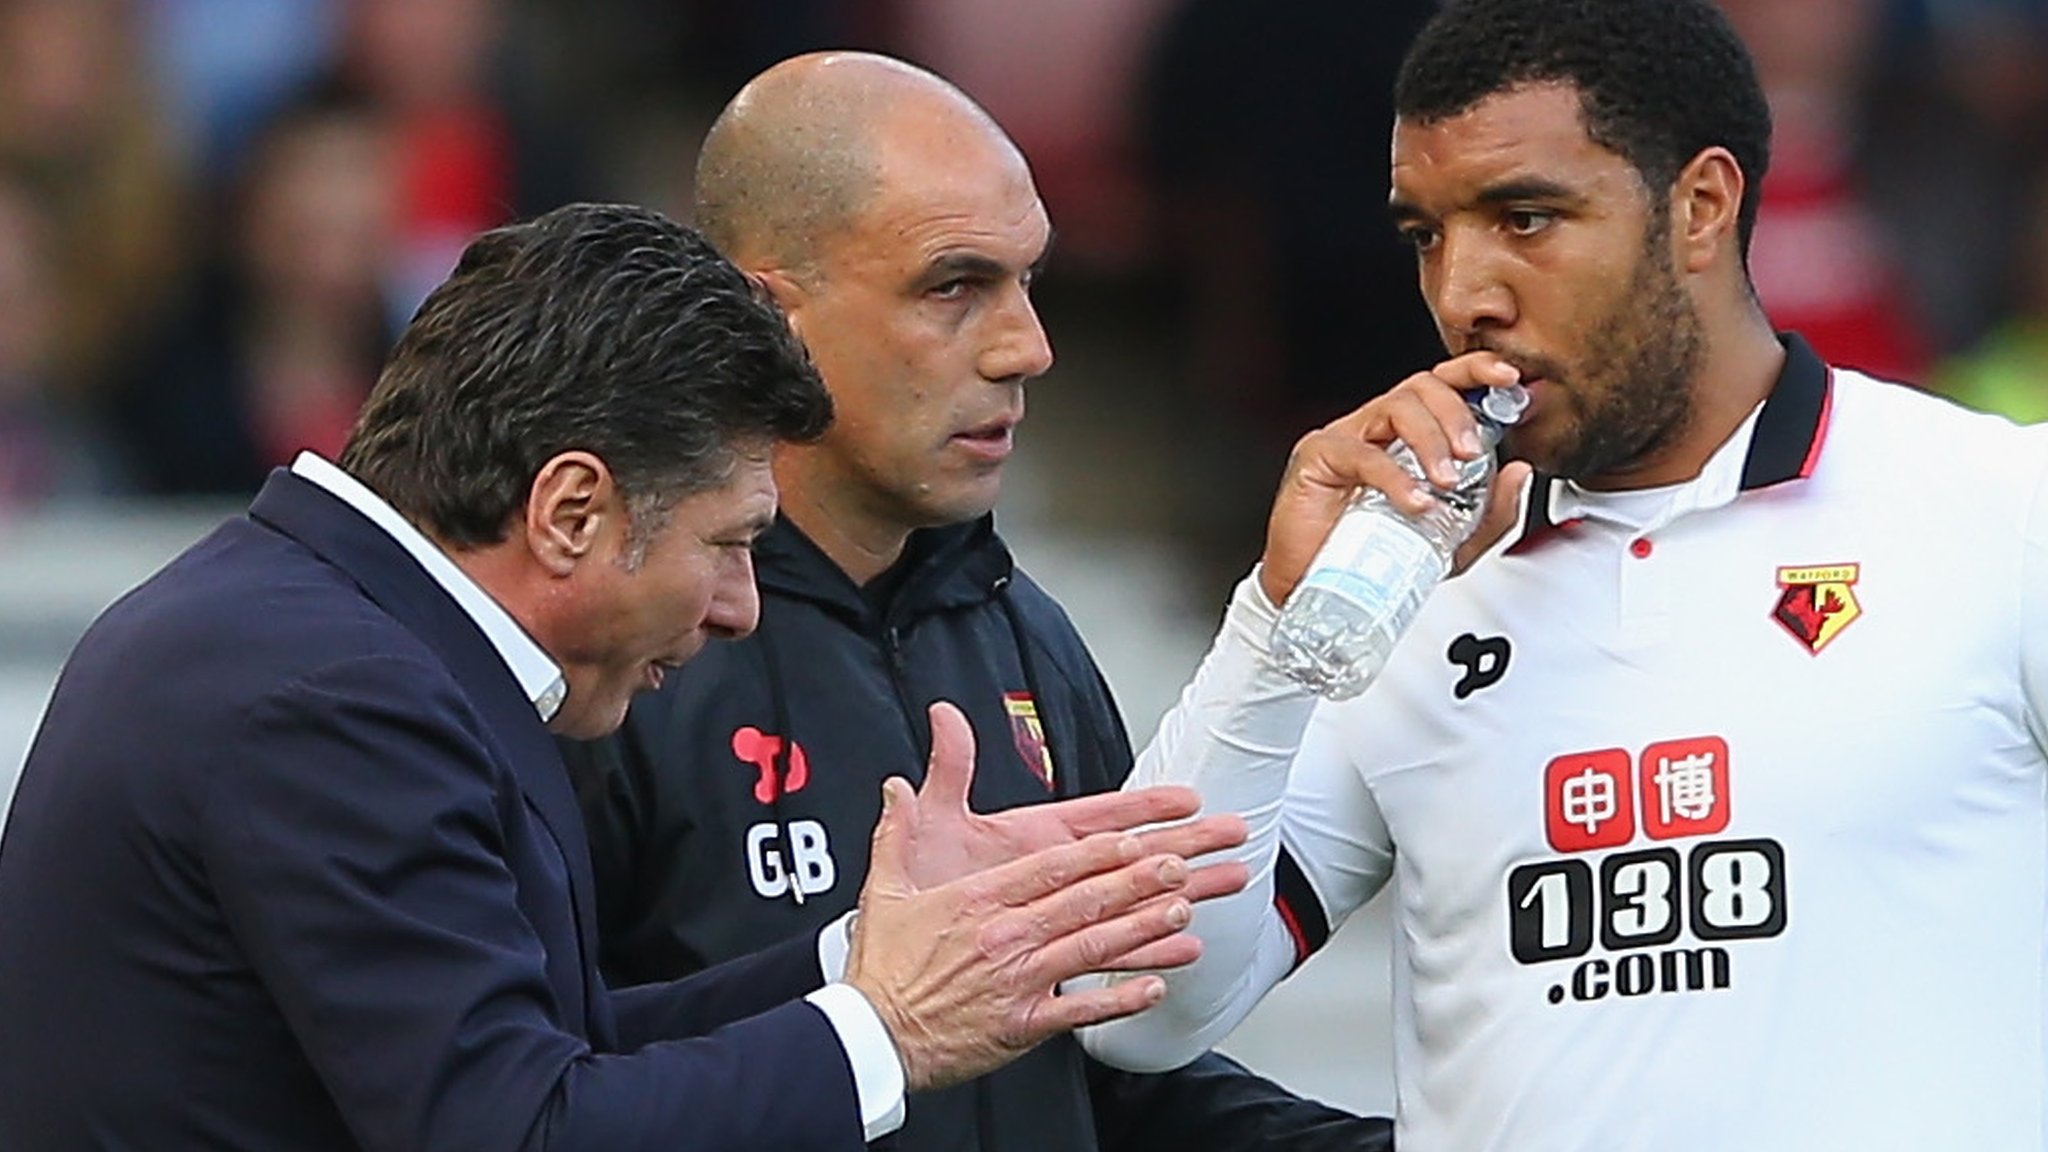 Mazzarri tried to sell me behind my back - Watford captain Deeney